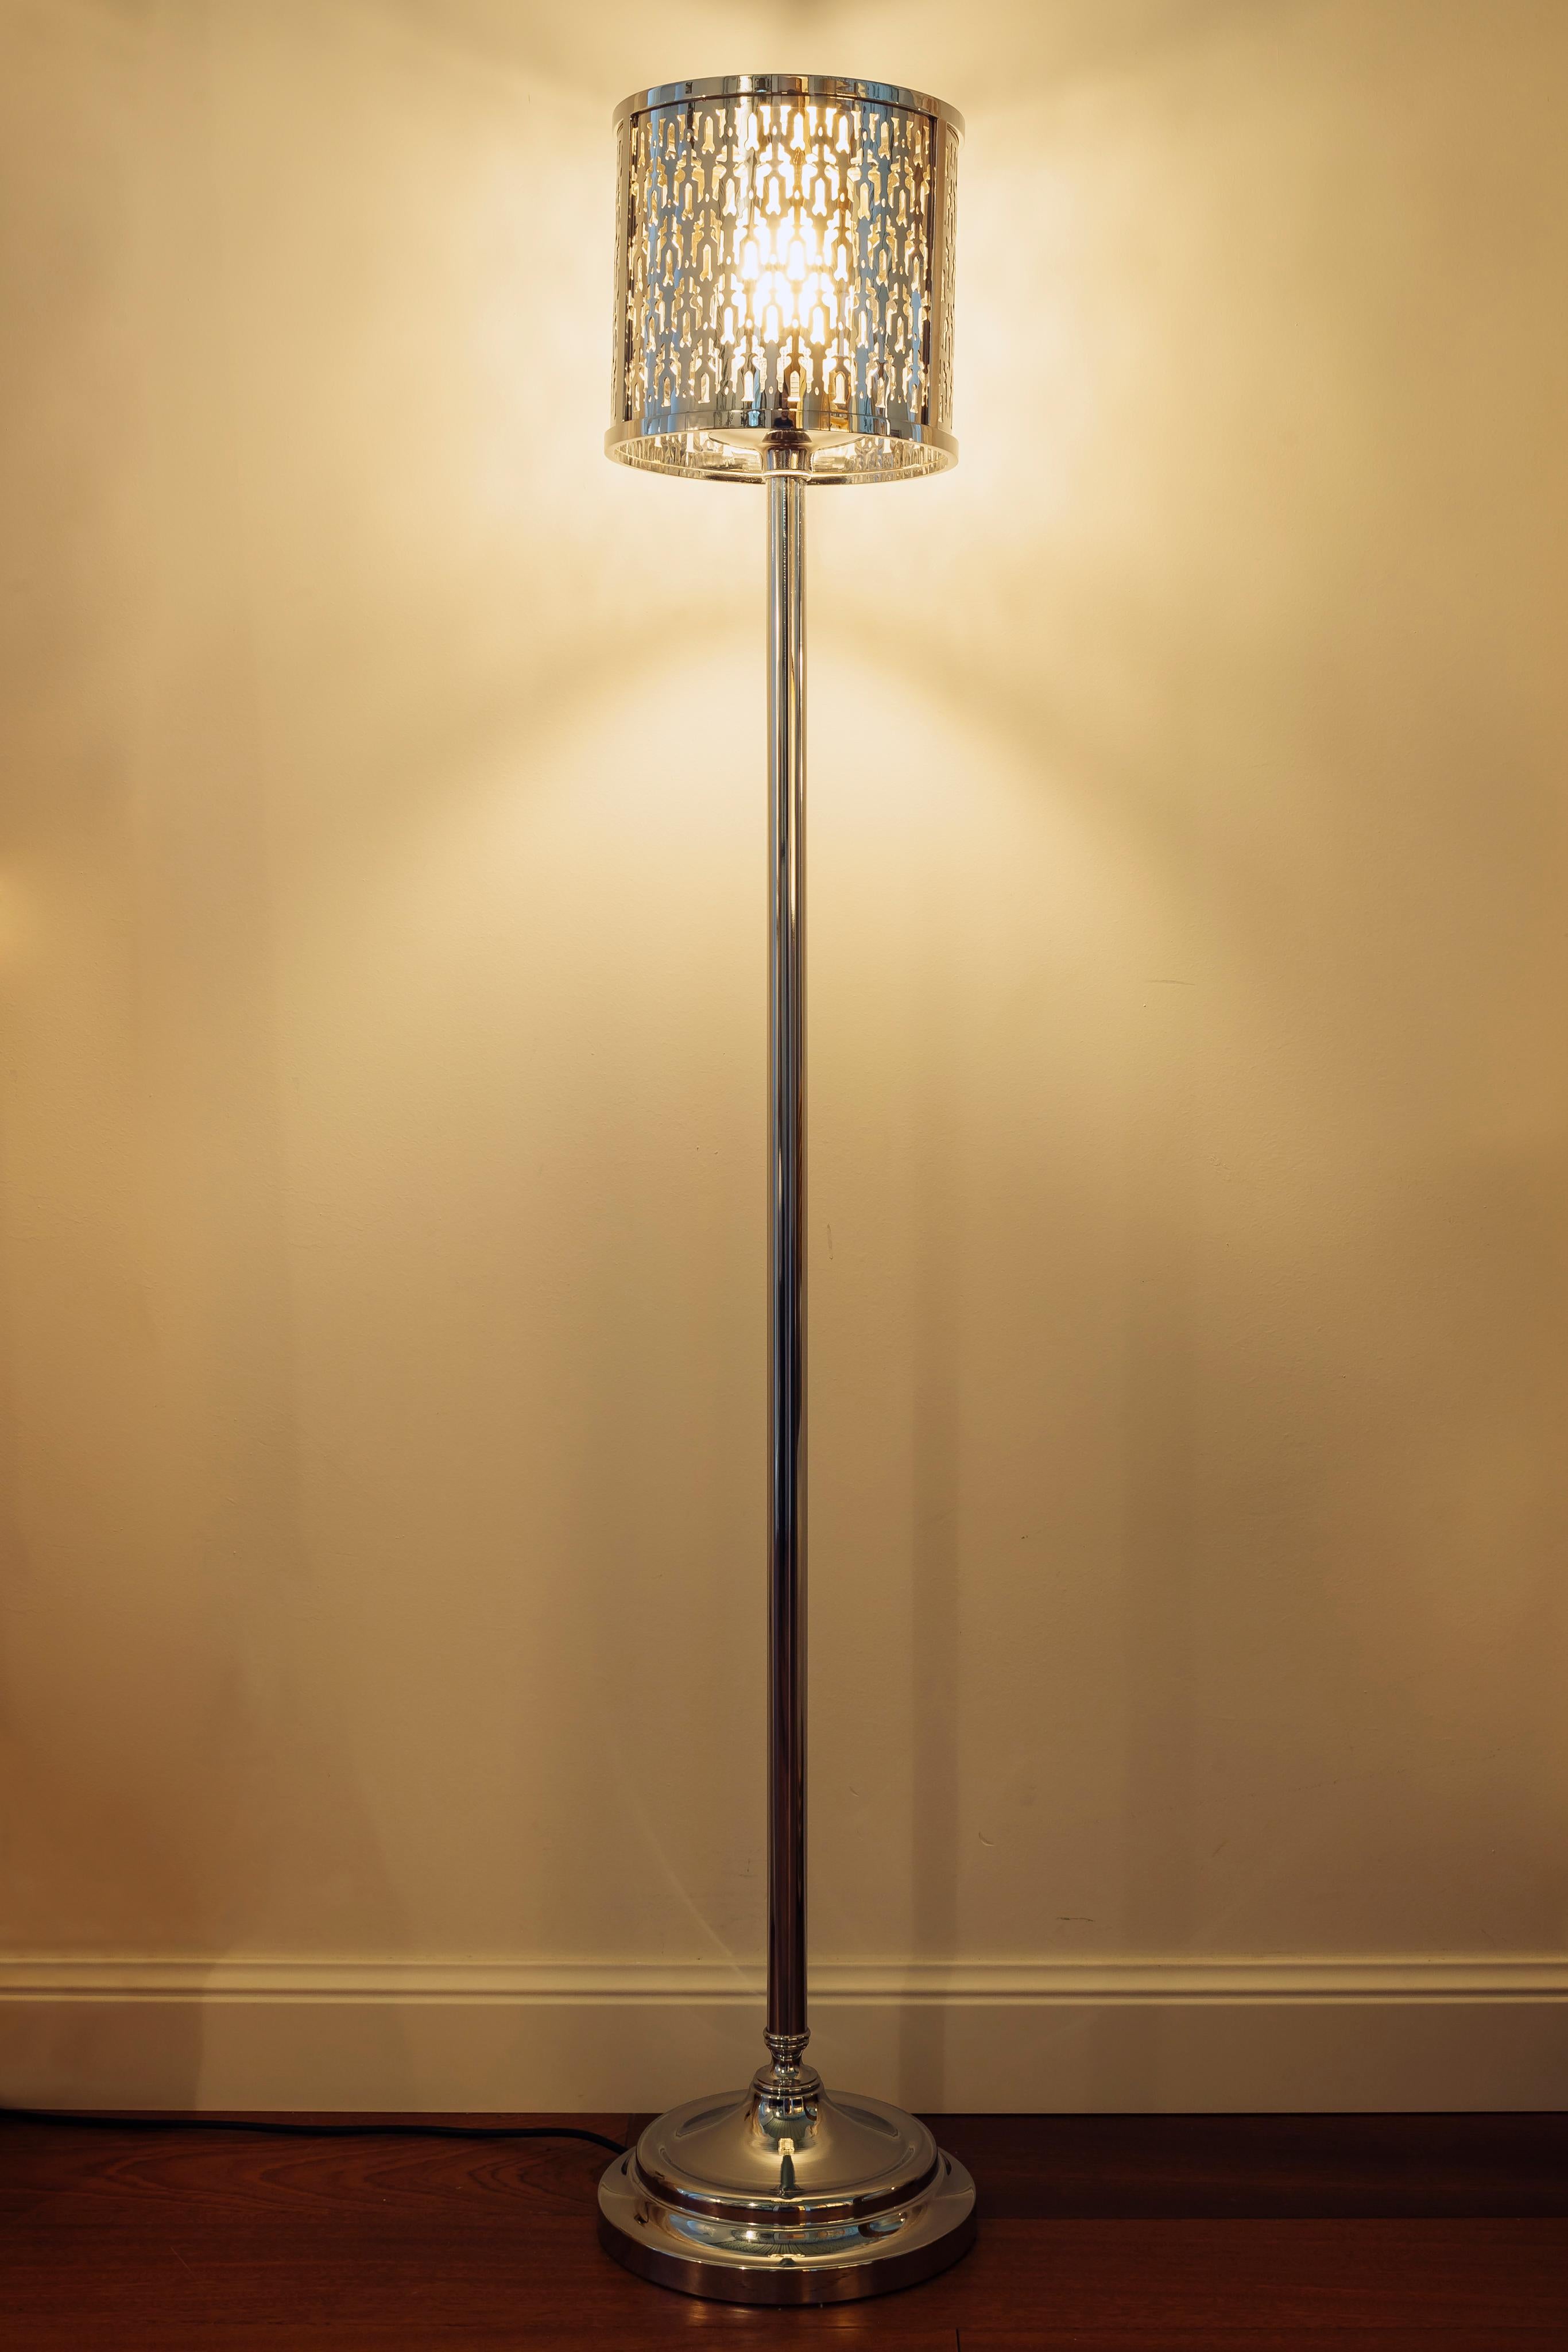 Studio 230 crome brass floor lamp with laser cut lampshade arabic style. It pertains to the Timeless collection in which classical objects, lamps and furniture coexist together with pieces reinterpreted in more contemporary shape. This floor lamp